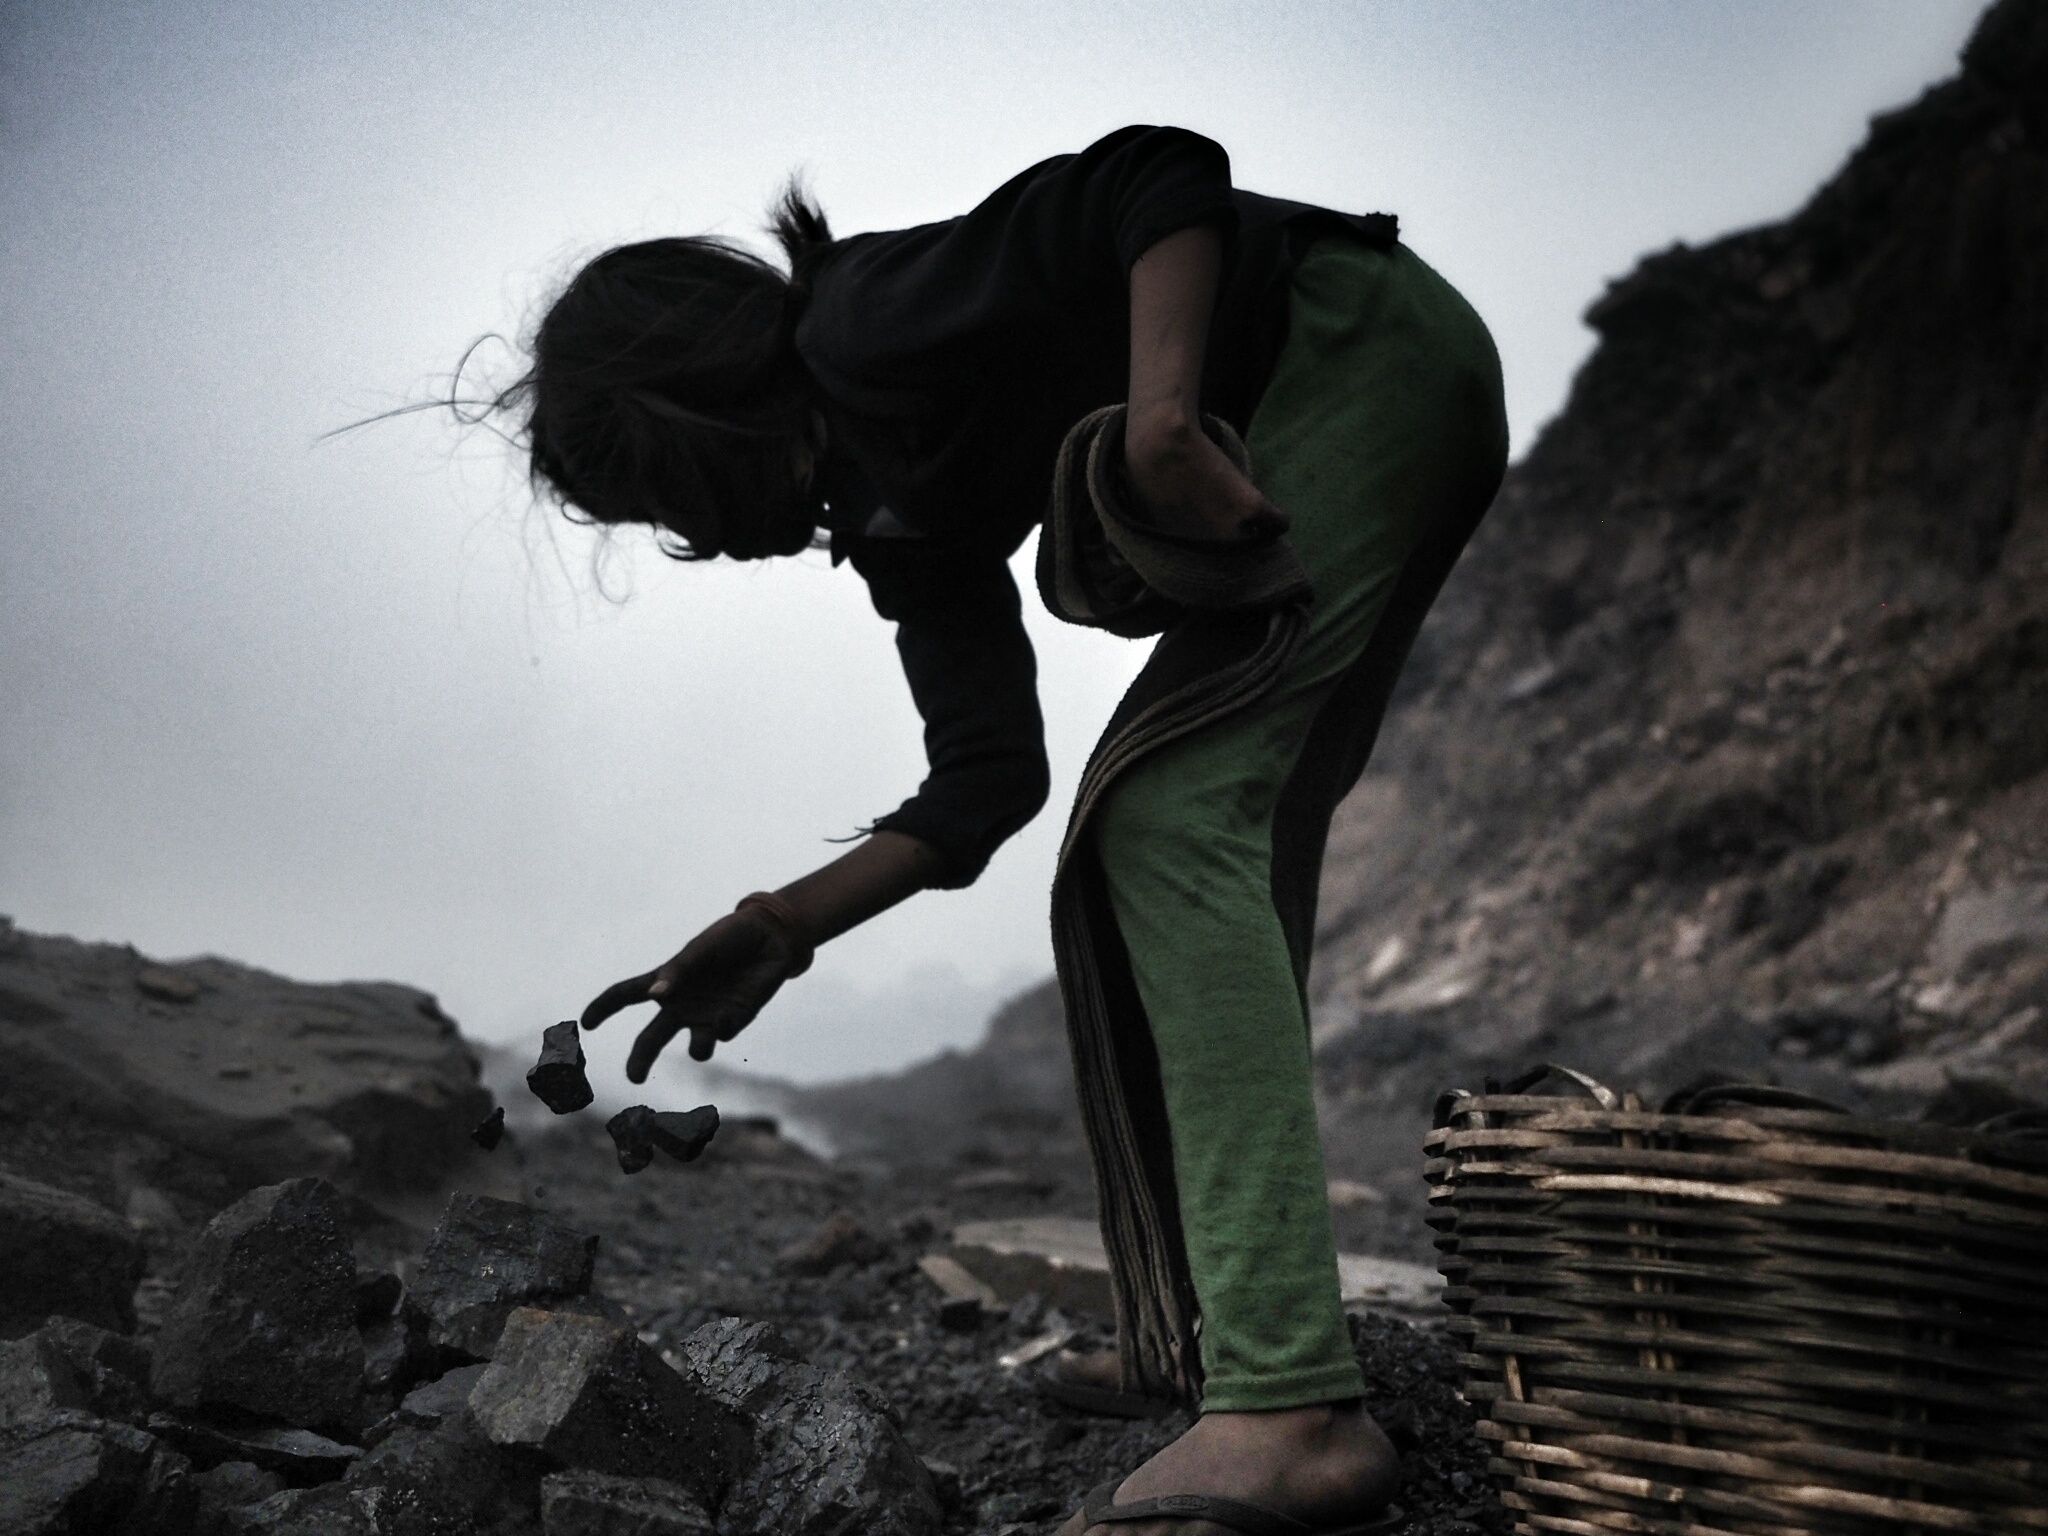 A young girl picks through a coal bed at the Alkusha mine.